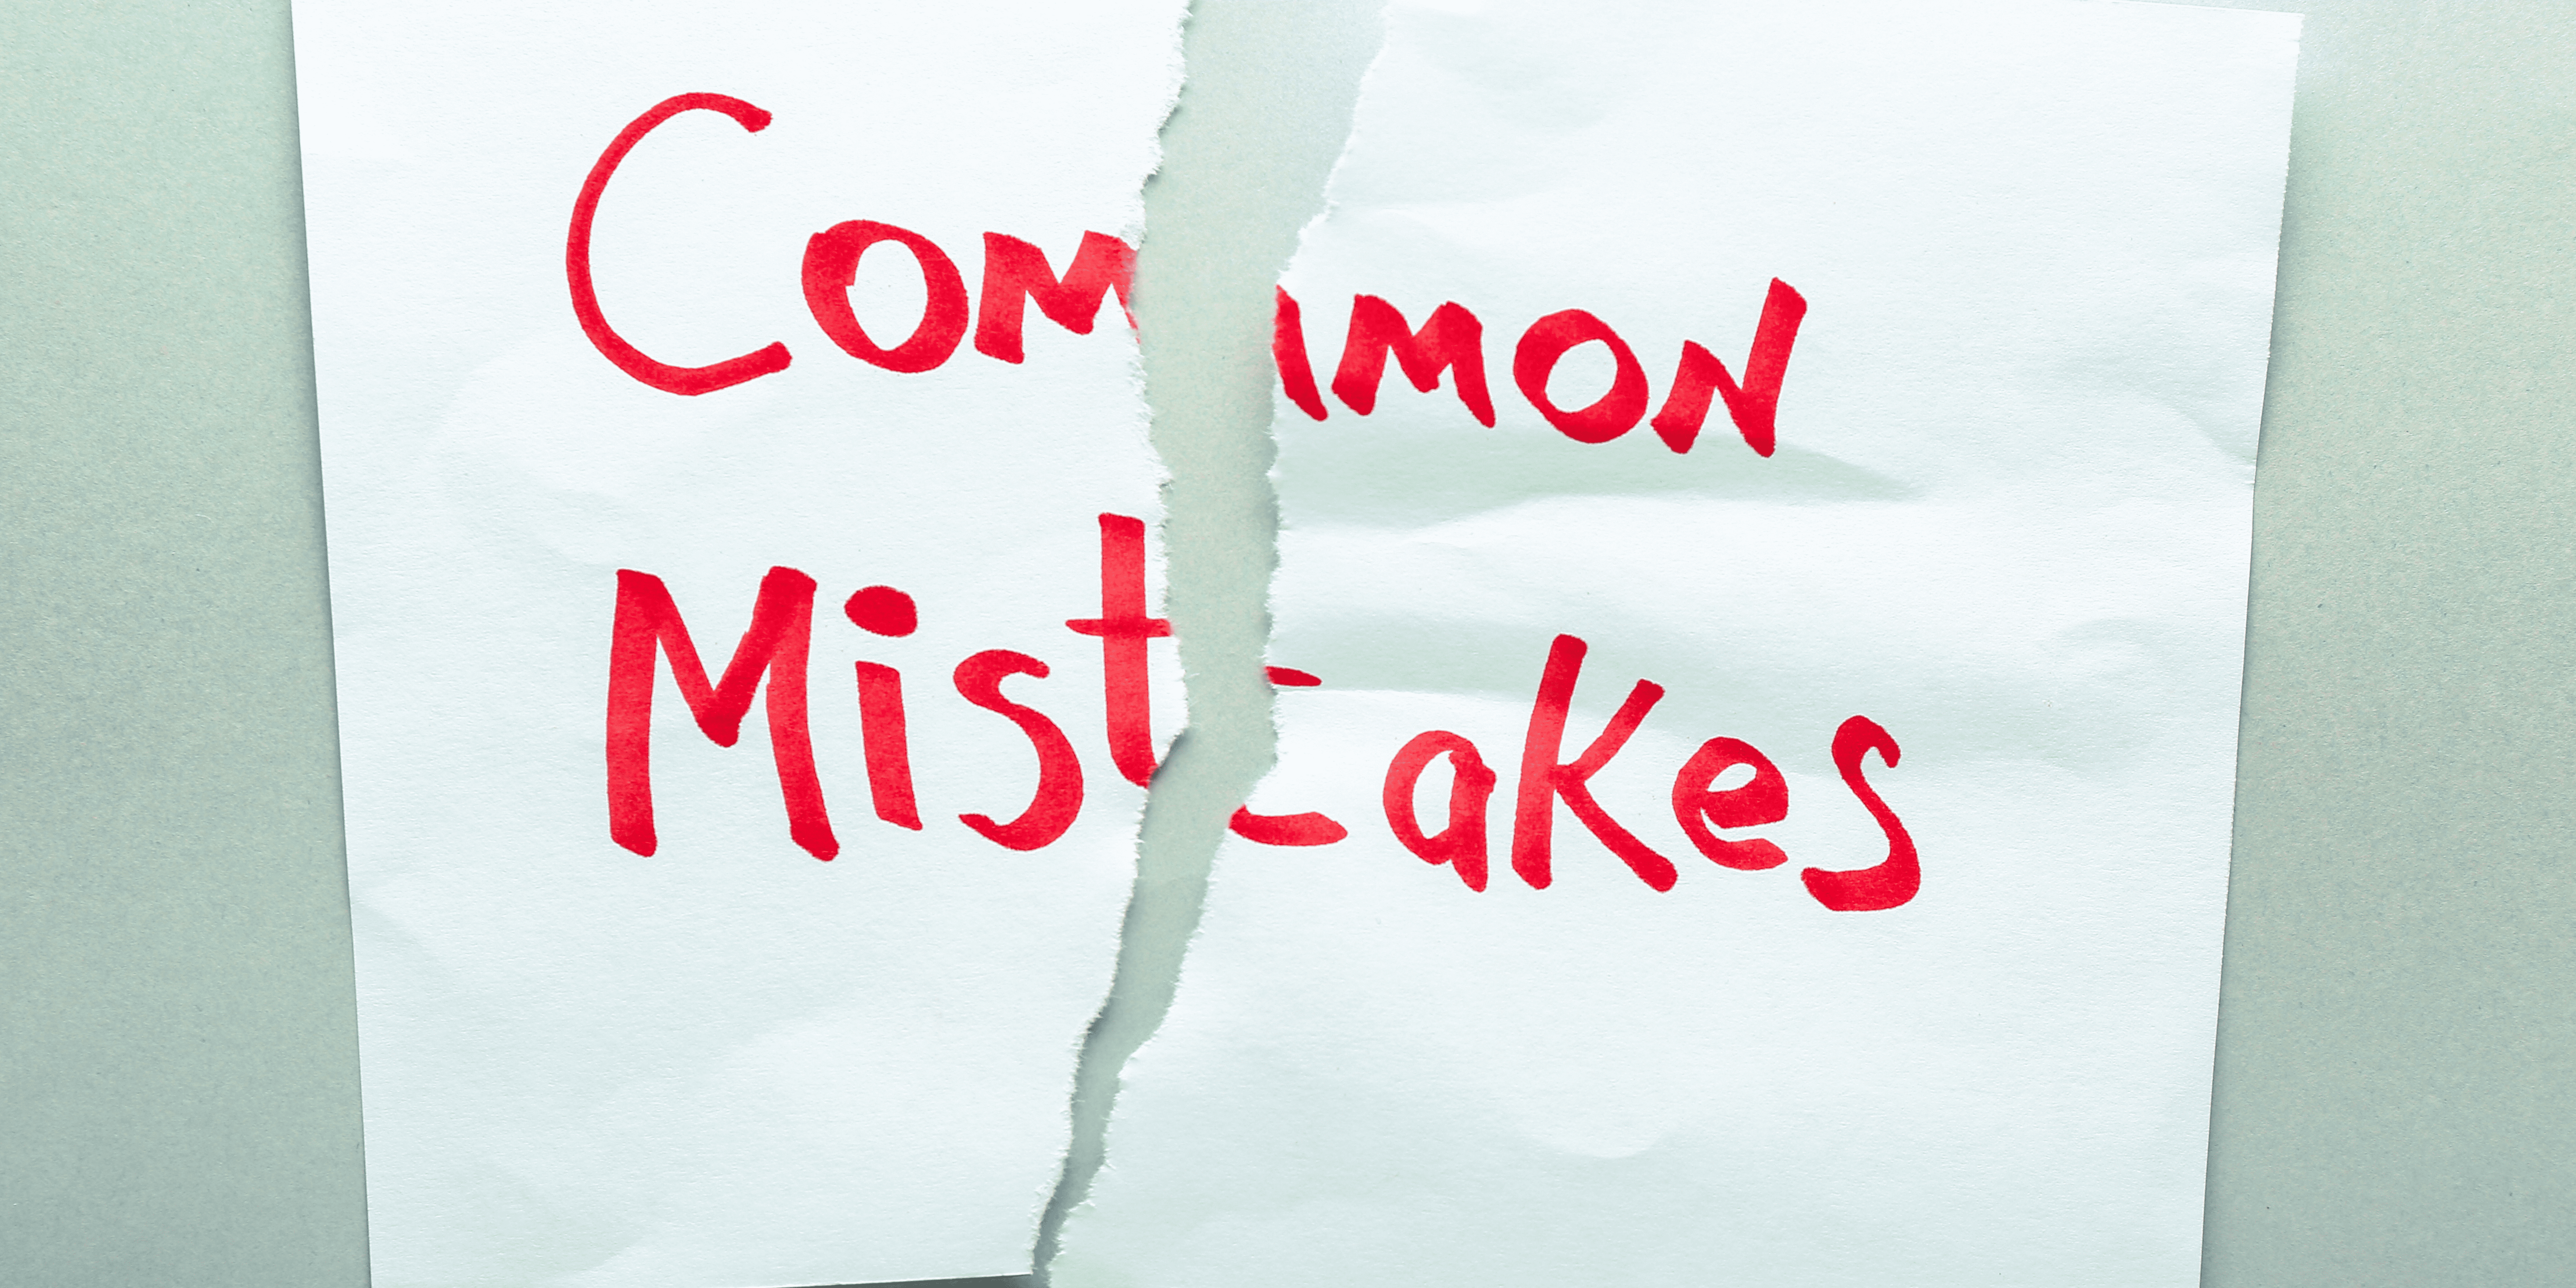 Five Common CV Mistakes That Hiring Managers Will Judge You On